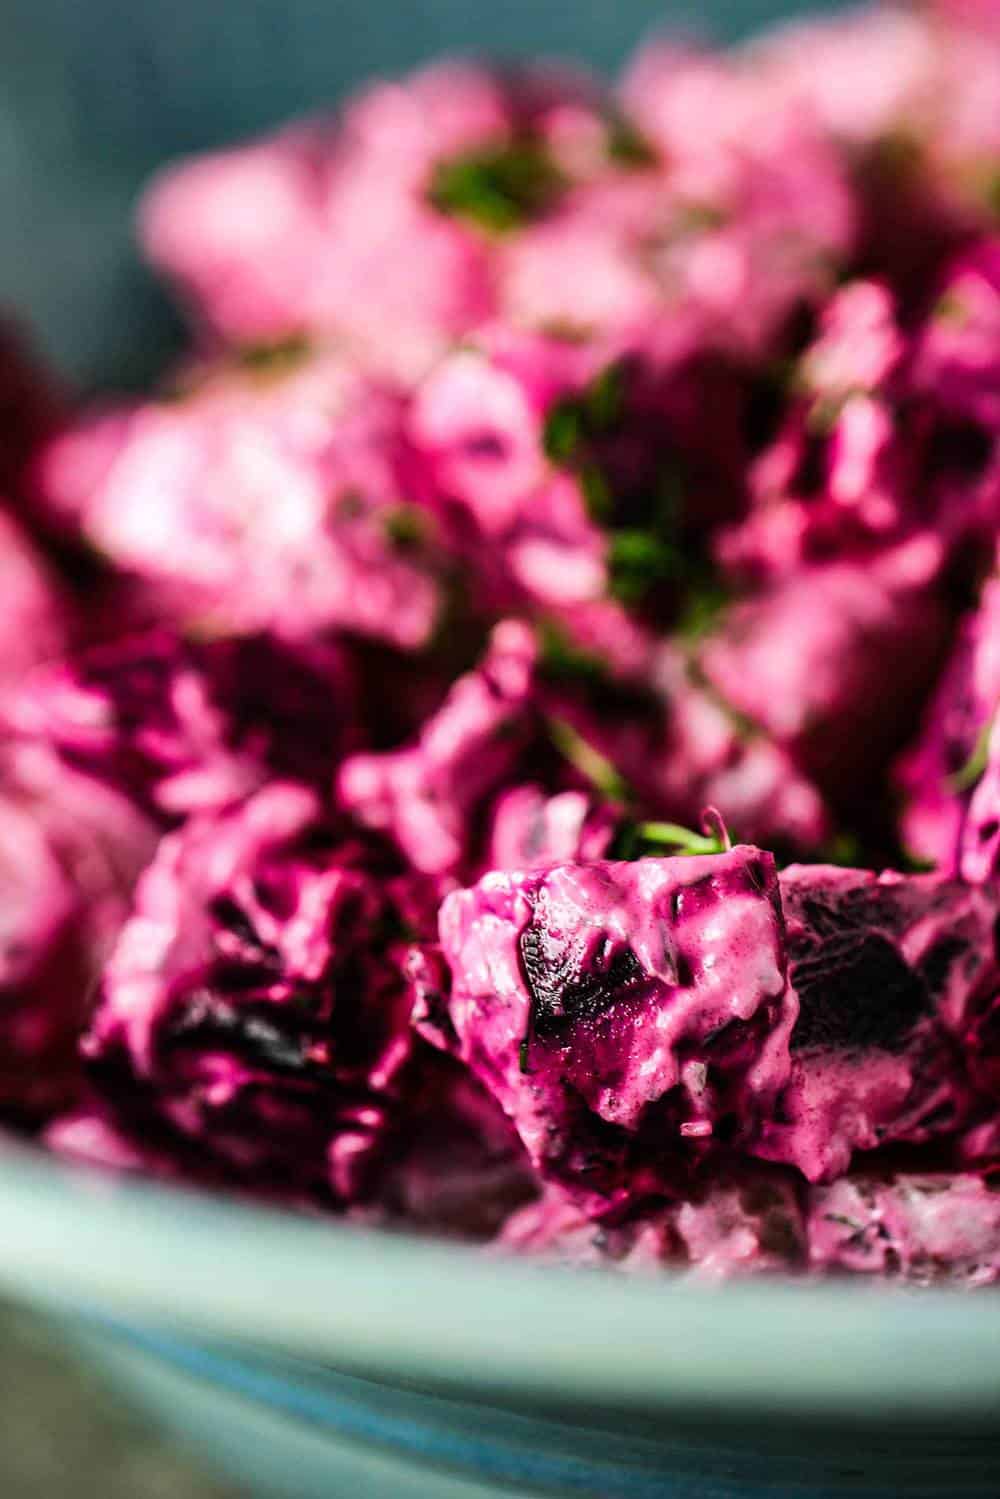 A close up view of red beet and potato salad with dill dressing